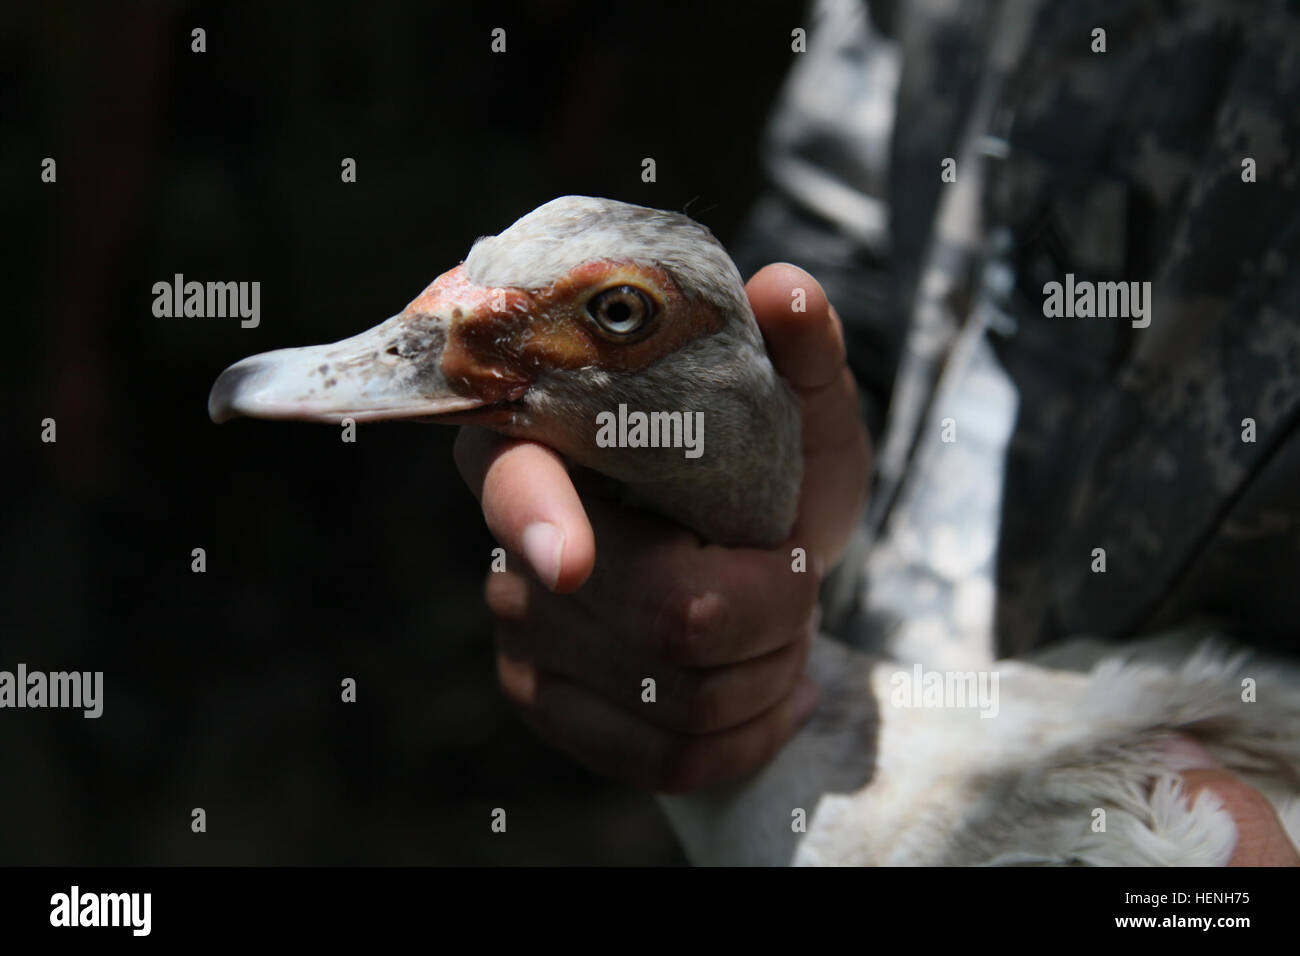 U.S. Army Sgt. 1st Class Omar Cruz, of the 410 Civil Affairs, vaccinates a duck for a Veterinary Readiness Training Exercise during Beyond the Horizon, San Jose, Guatemala, May 25, 2015. Beyond the Horizon is an annual exercise that embraces the partnership between the United States and Guatemala, to provide focused humanitarian assistance through various medical, dental, and civic action programs. (U.S. Army photo by Pfc. Christopher Martin/Released) Beyond the Horizon 2014, Guatemala 140525-A-GA303-066 Stock Photo